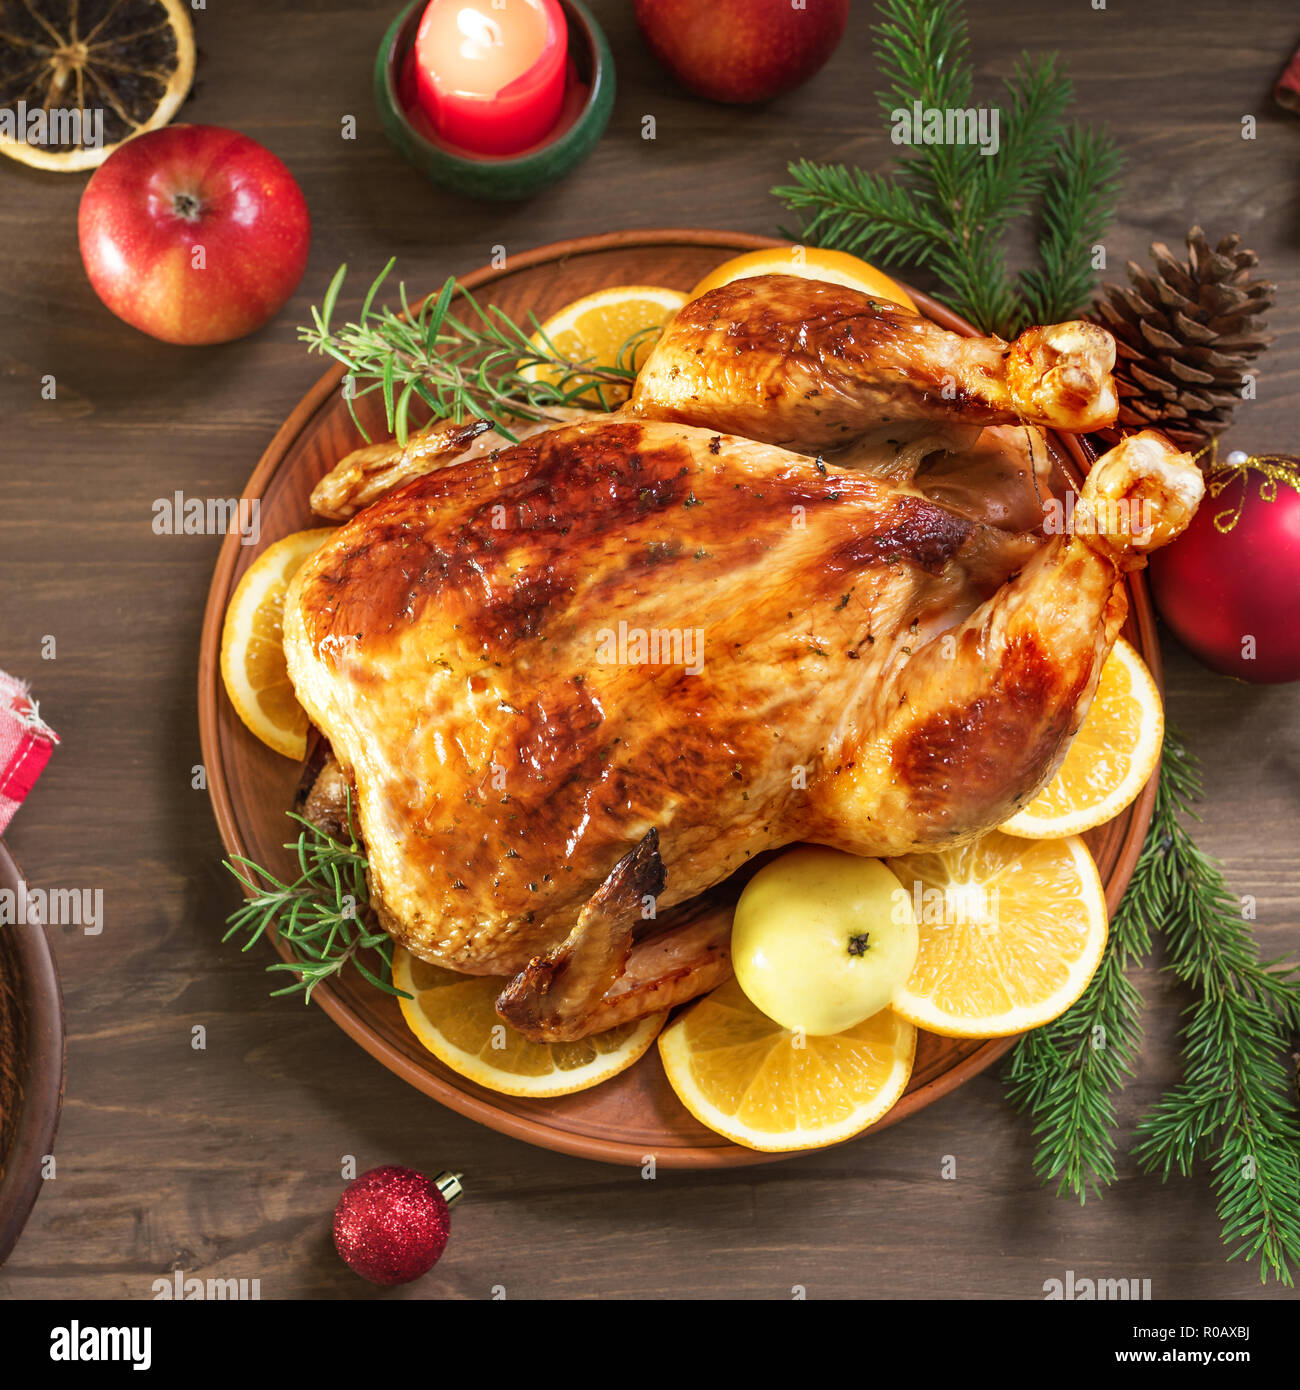 Roasted Christmas Chicken or Turkey for Christmas Dinner. Festive decorated wooden table for Christmas Dinner with baked stuffed chicken. Stock Photo